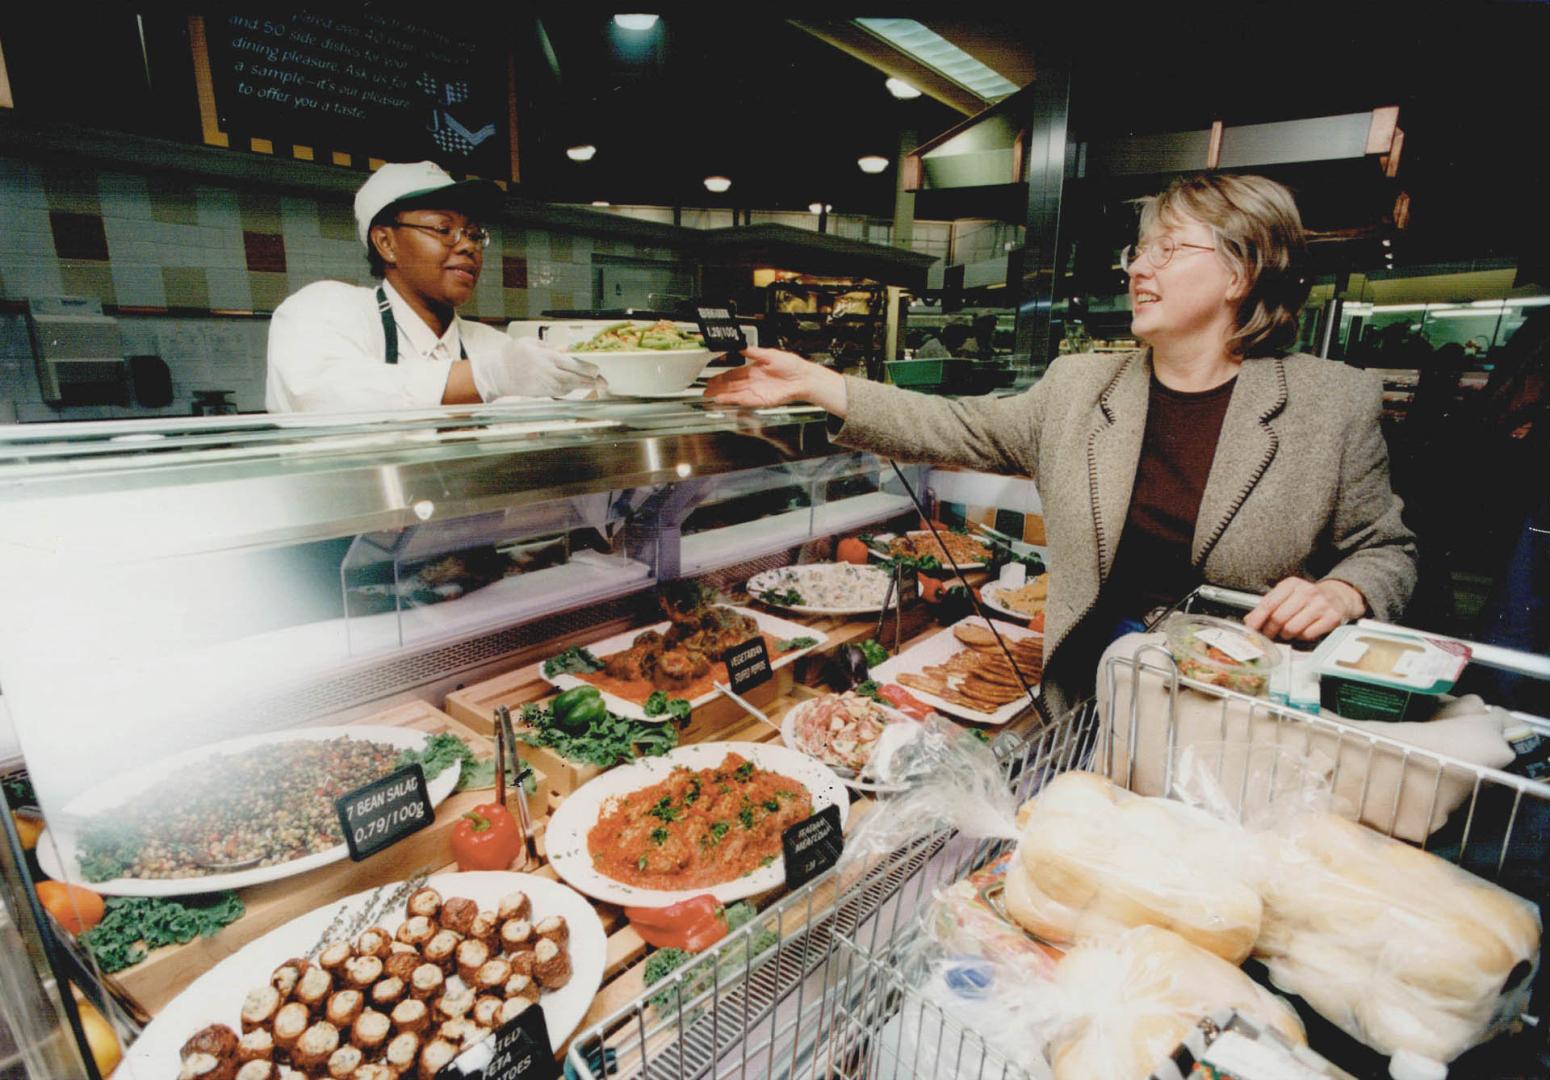 Ready to go: Social worker Madeleine Ellis, above, receives fresh prepared food from Andrea Barry at an IGA in Mississauga, which now has an extensive kitchen